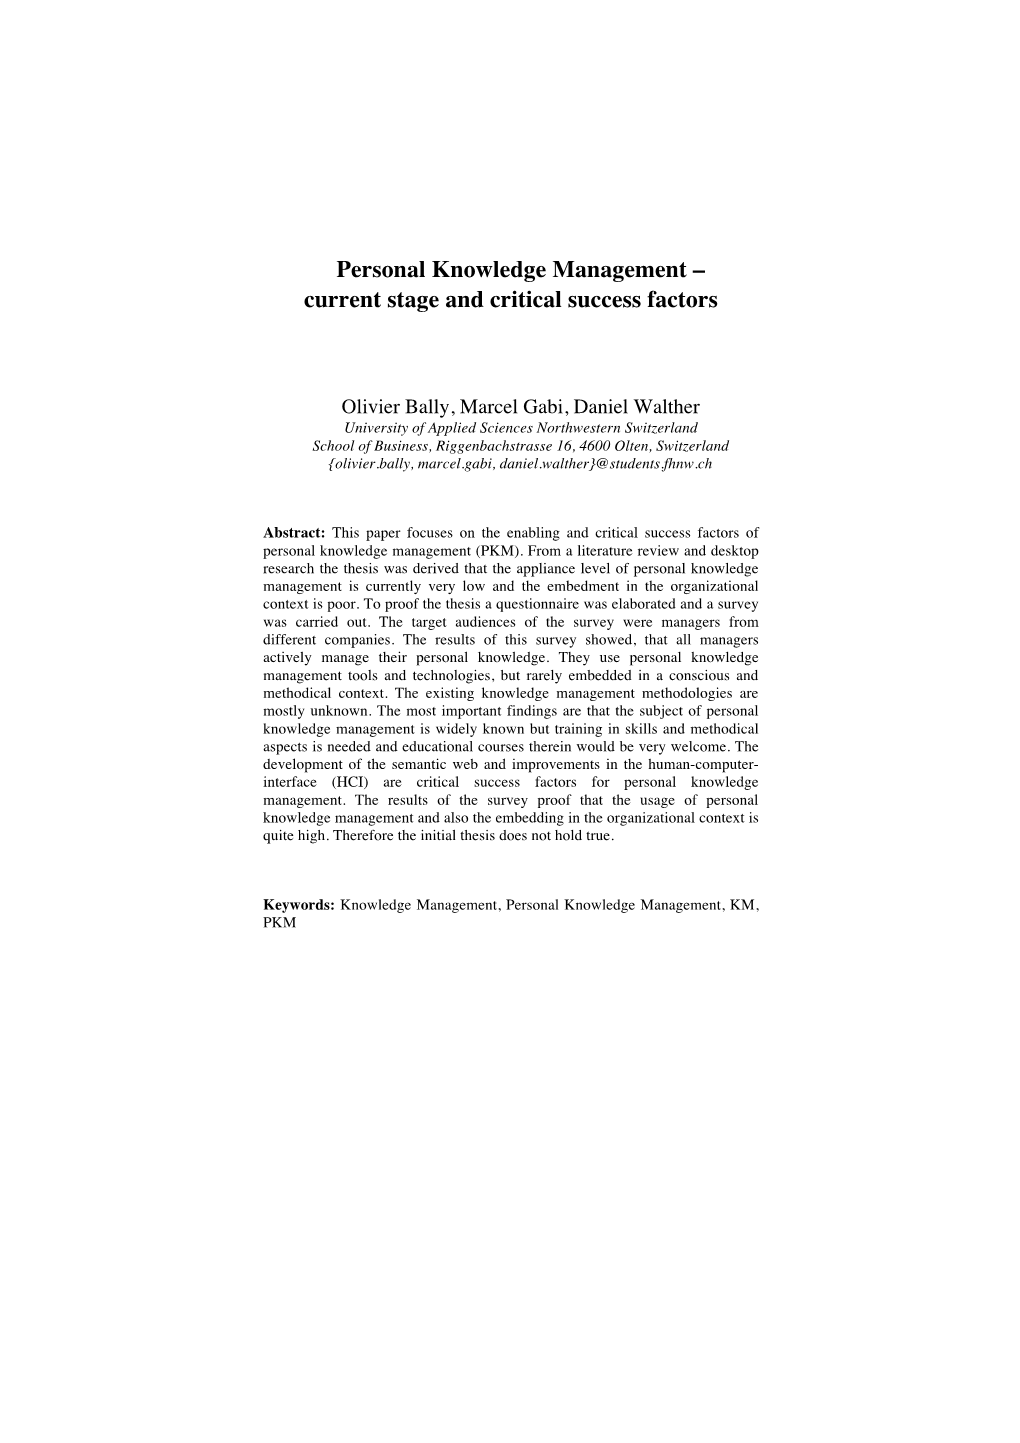 Personal Knowledge Management – Current Stage and Critical Success Factors